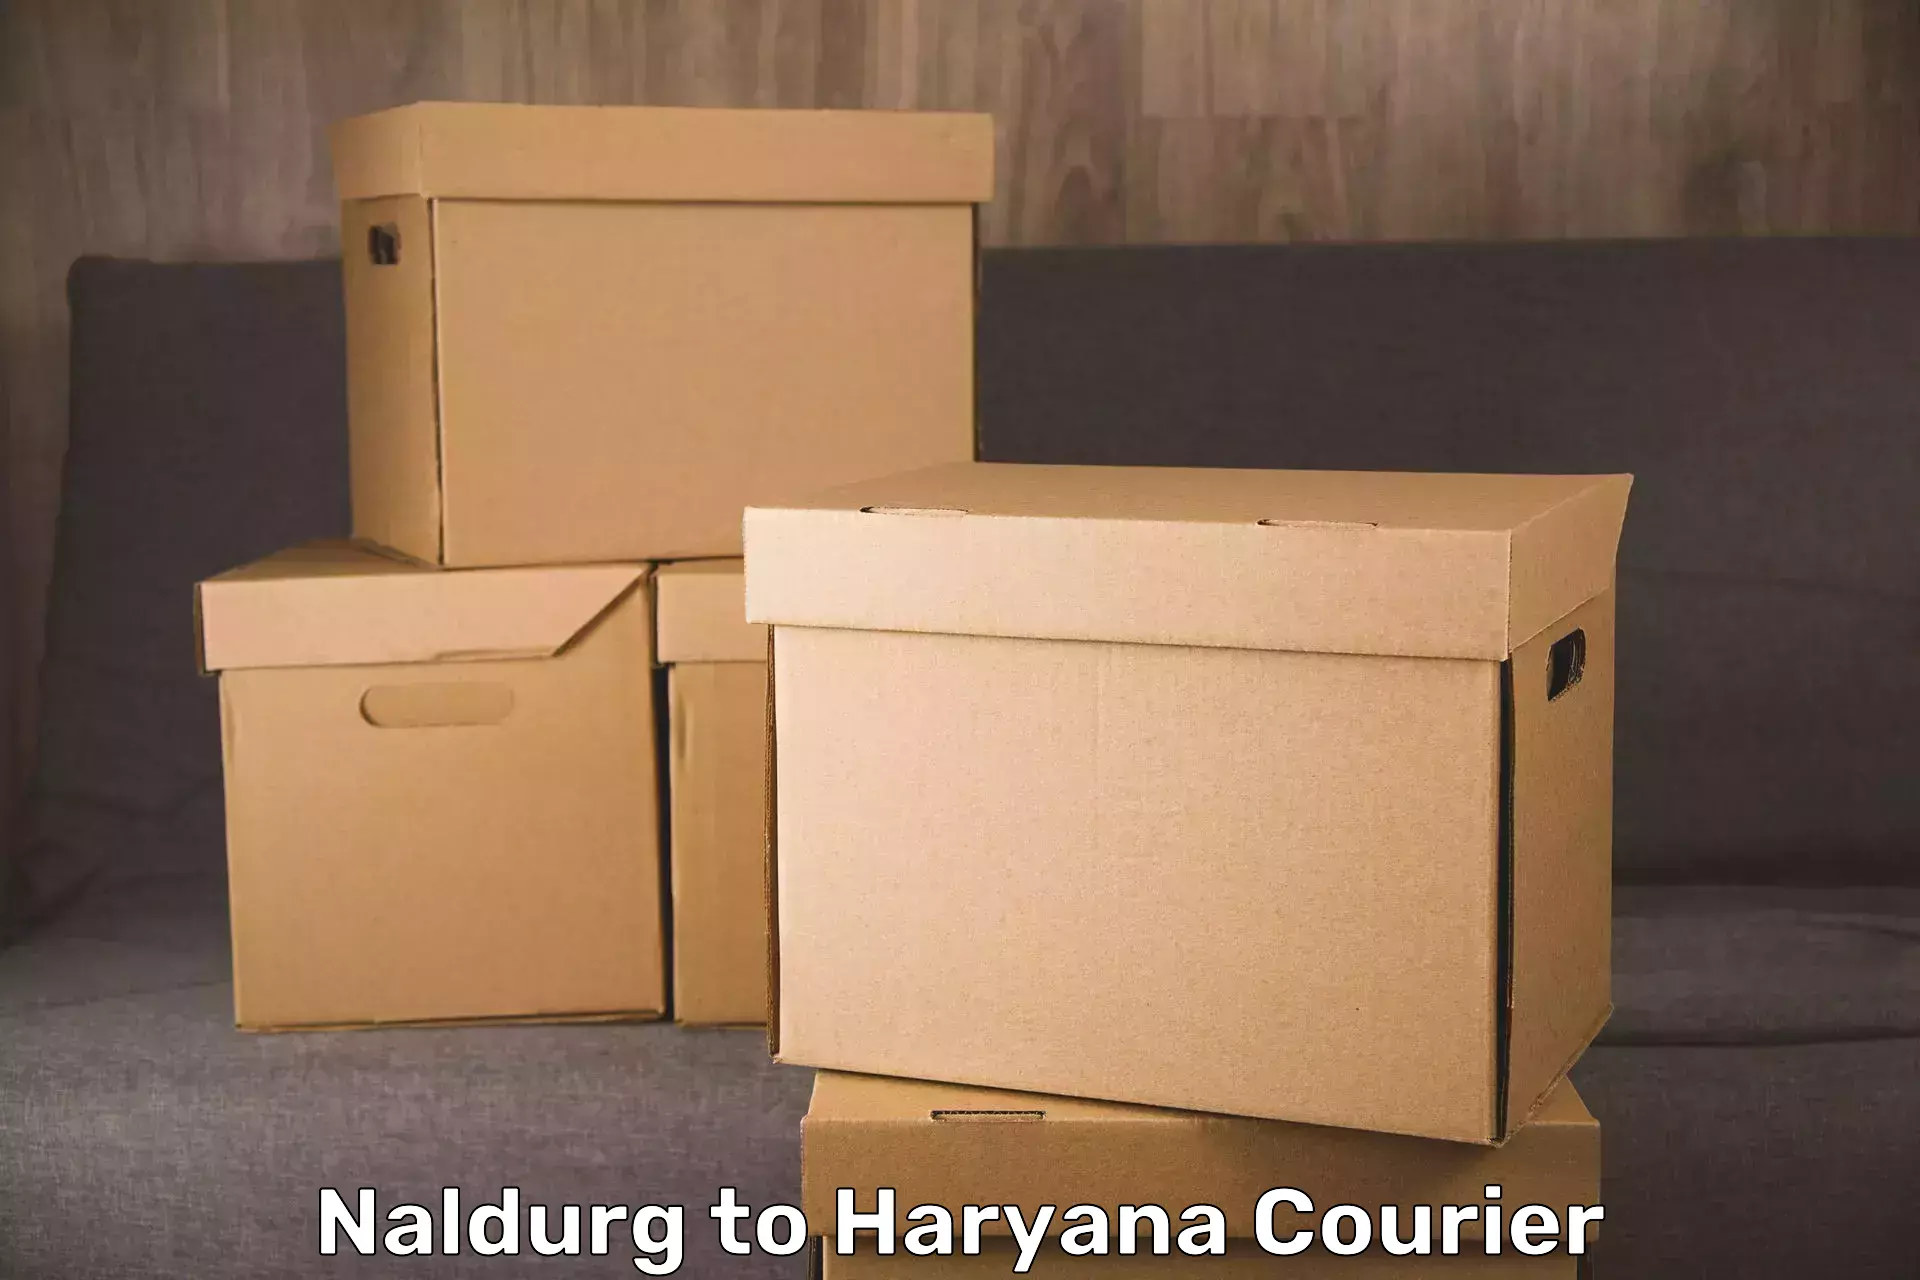 Airport luggage delivery in Naldurg to NCR Haryana